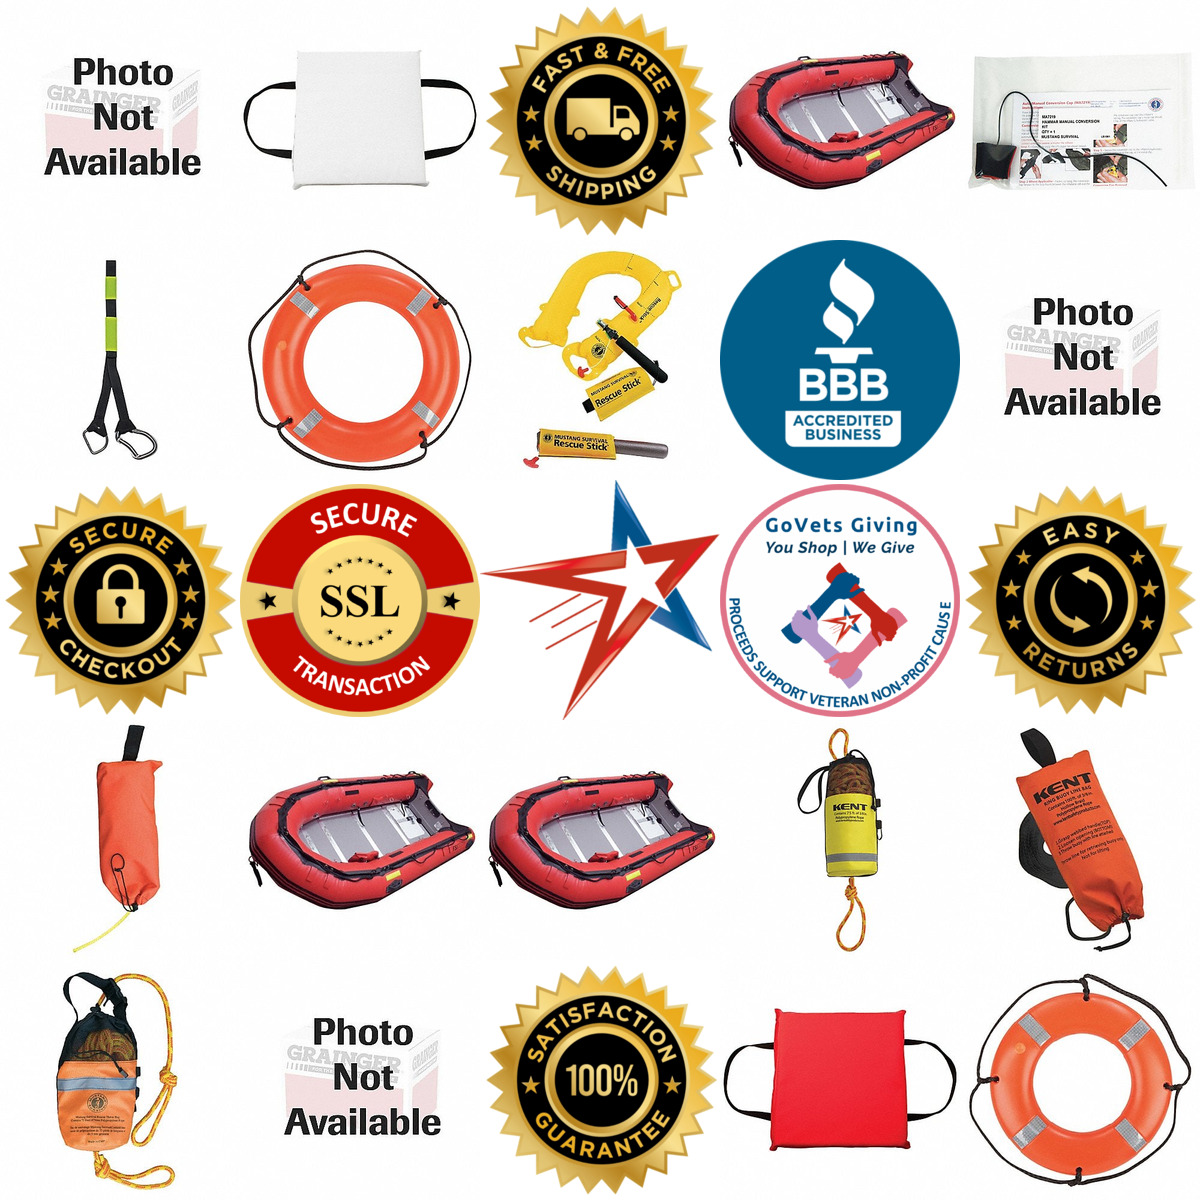 A selection of Water Rescue Equipment products on GoVets